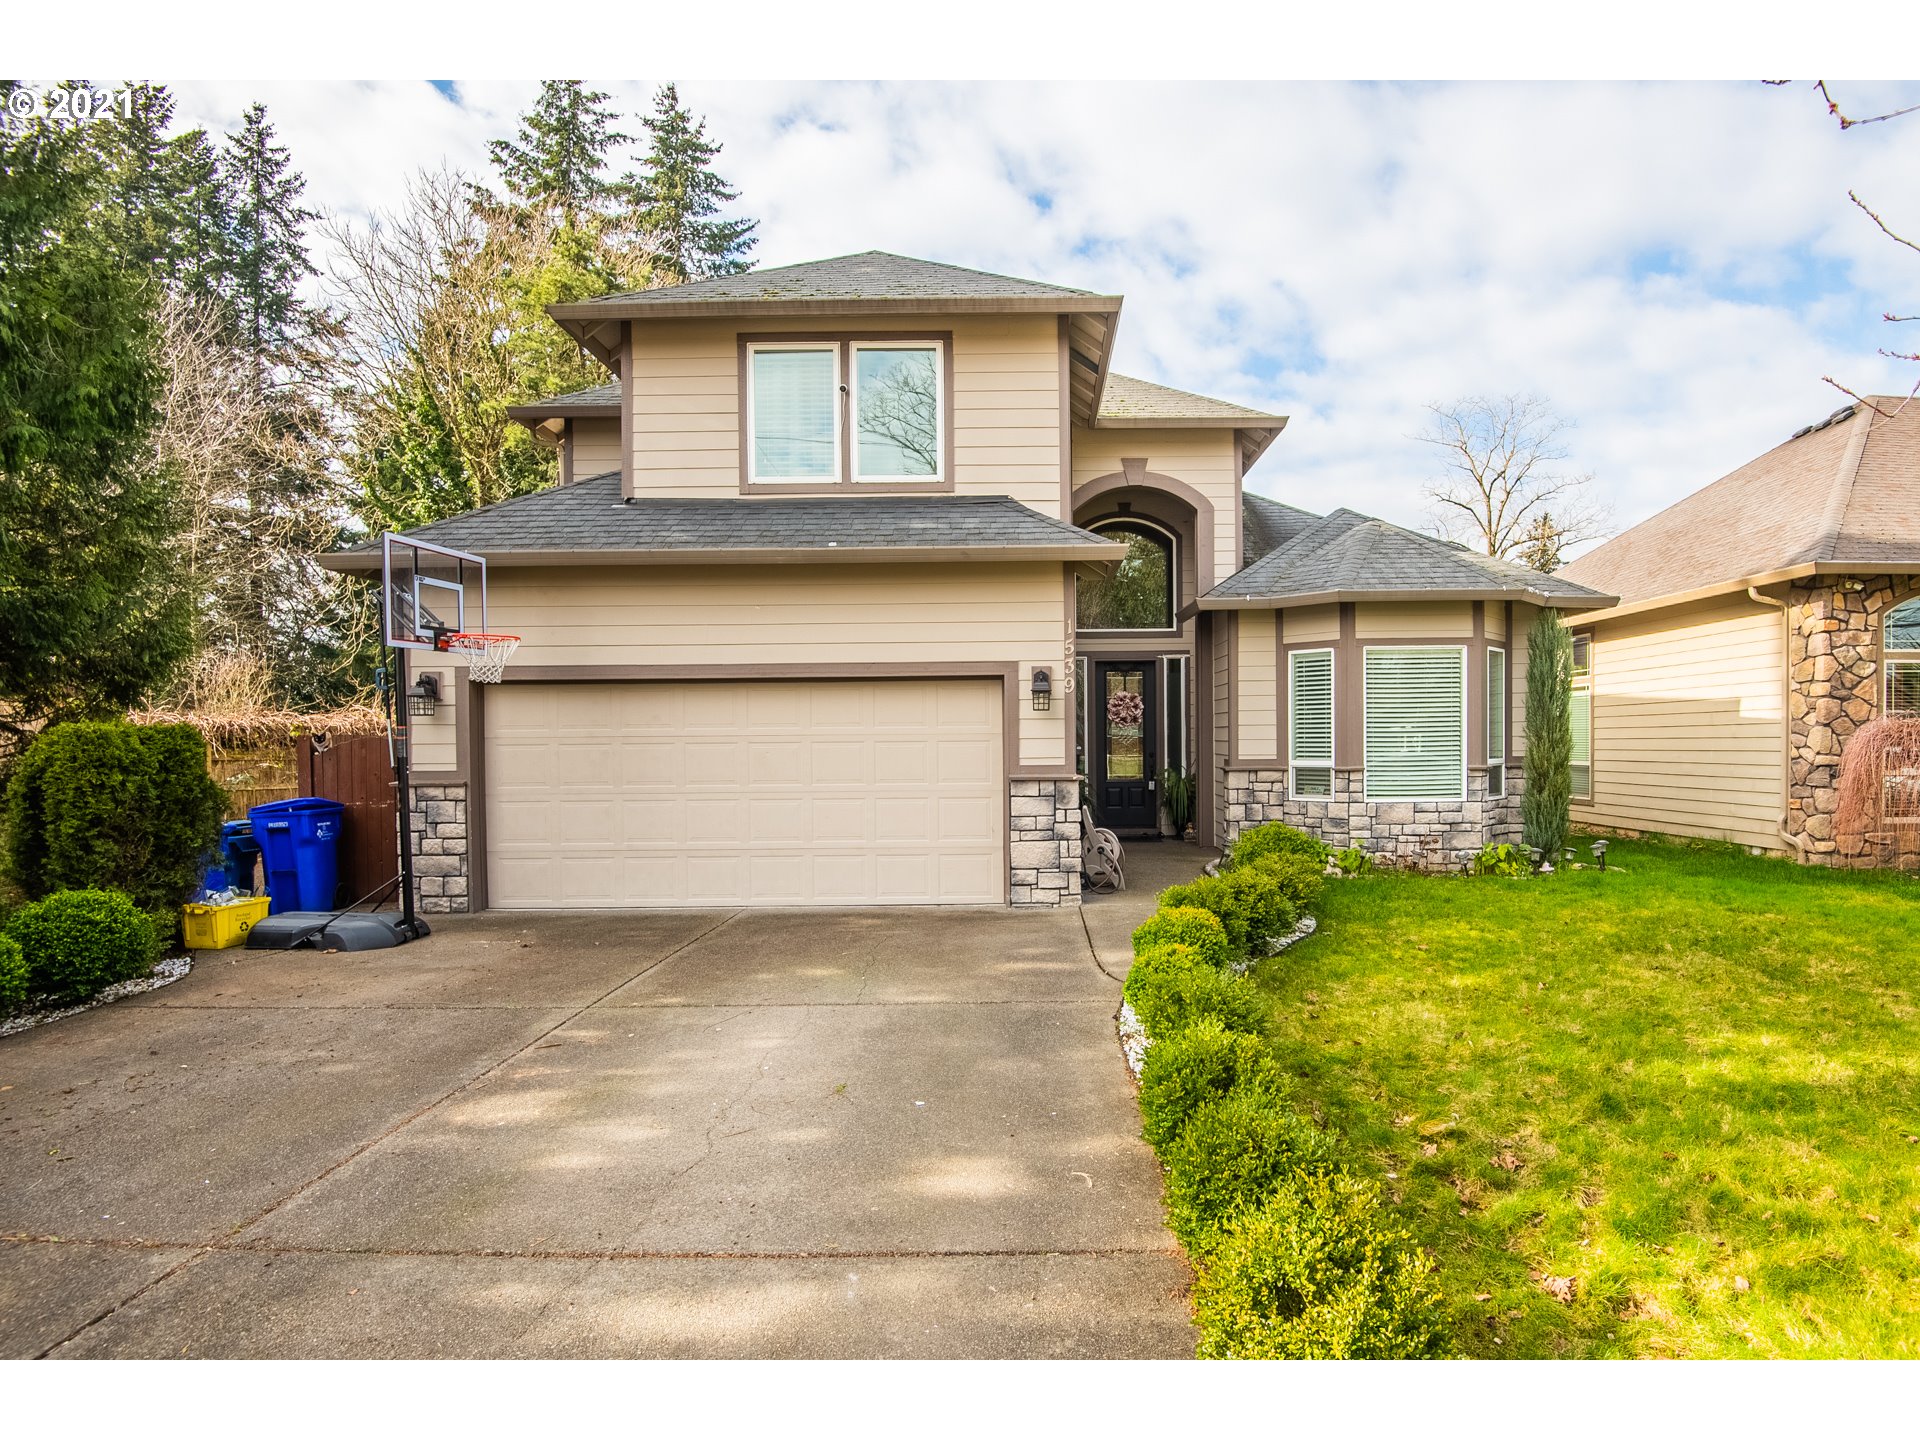 1539 SE 176TH AVE (1 of 30)